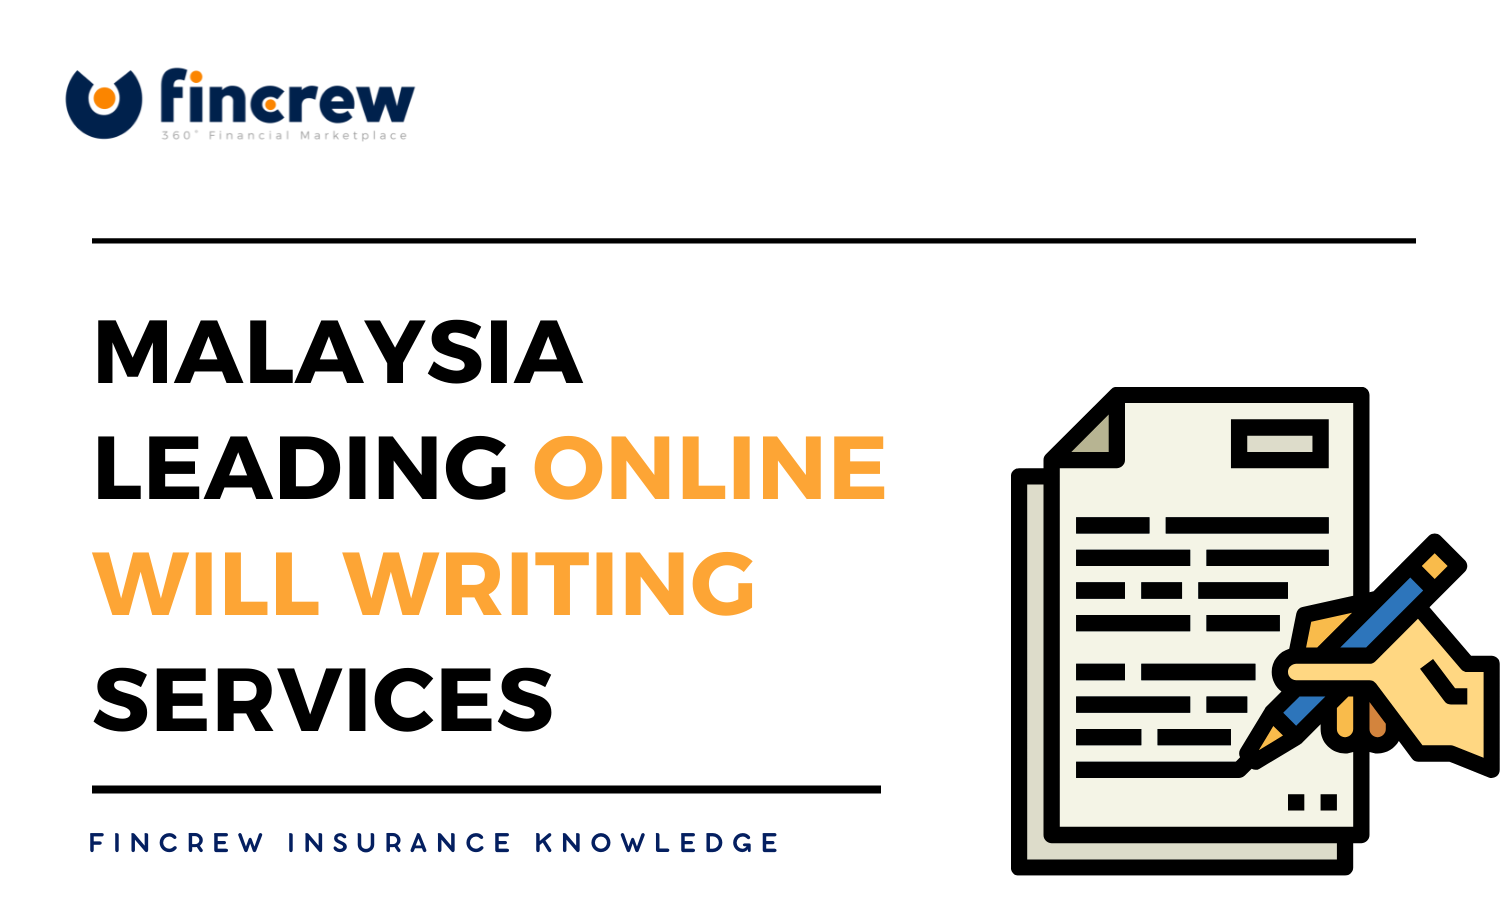 Fincrew Online Will Writing Services blog featured image